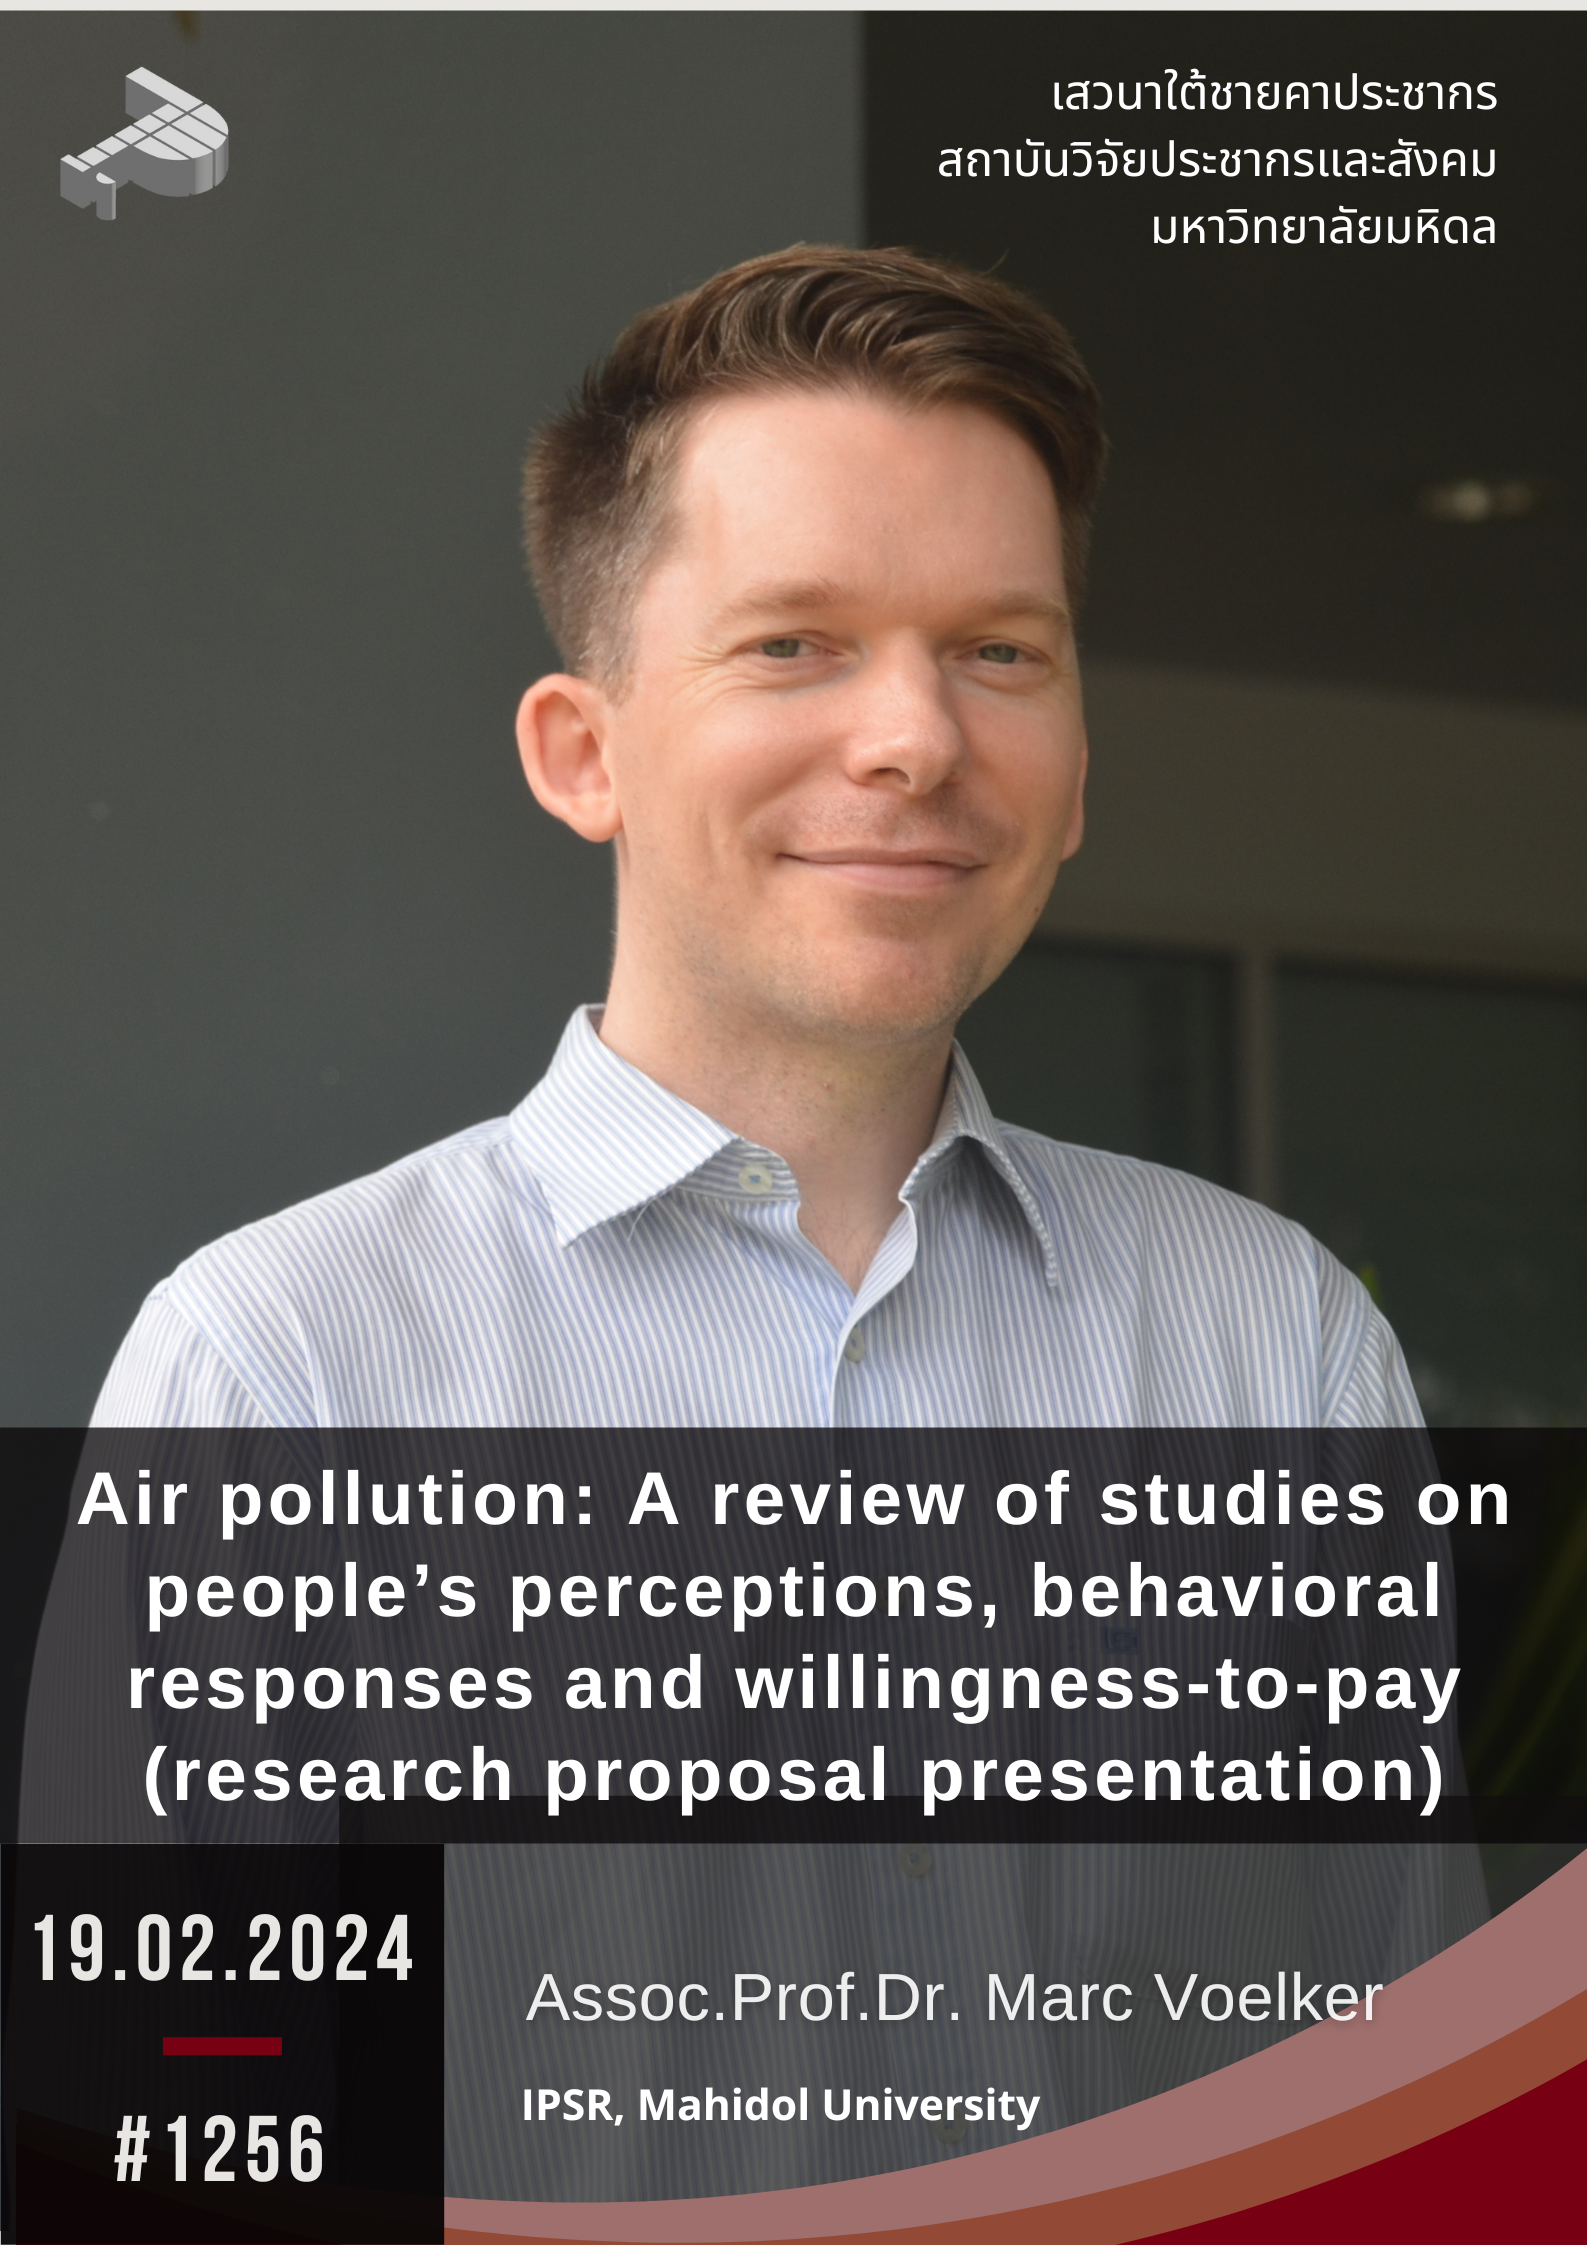 Air pollution: A review of studies on people’s perceptions, behavioral responses and willingness-to-pay (research proposal presentation)